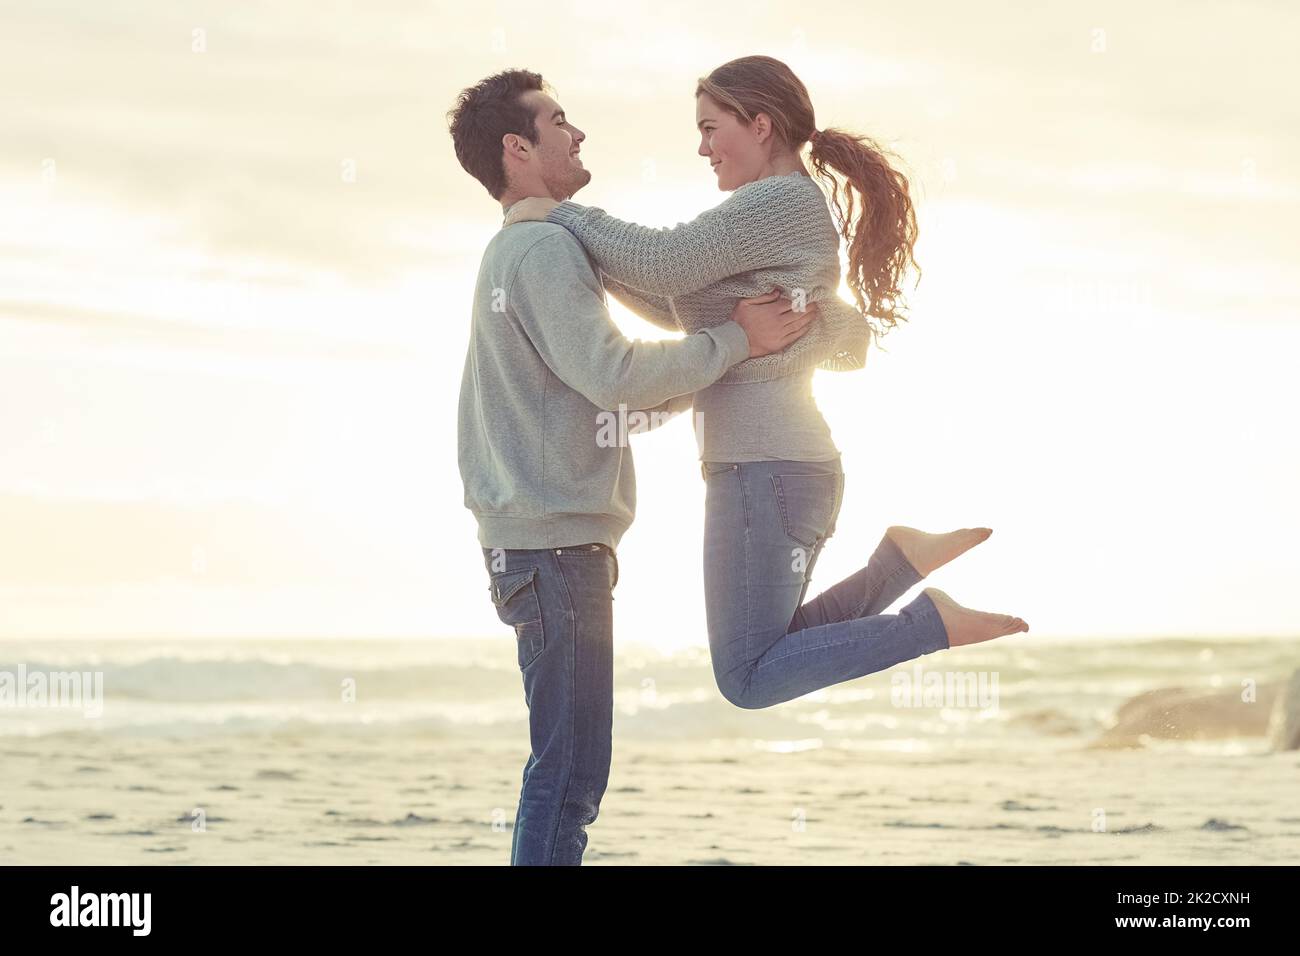 Seaside romance. Shot of a young couple relaxing on the beach together on the weekend. Stock Photo